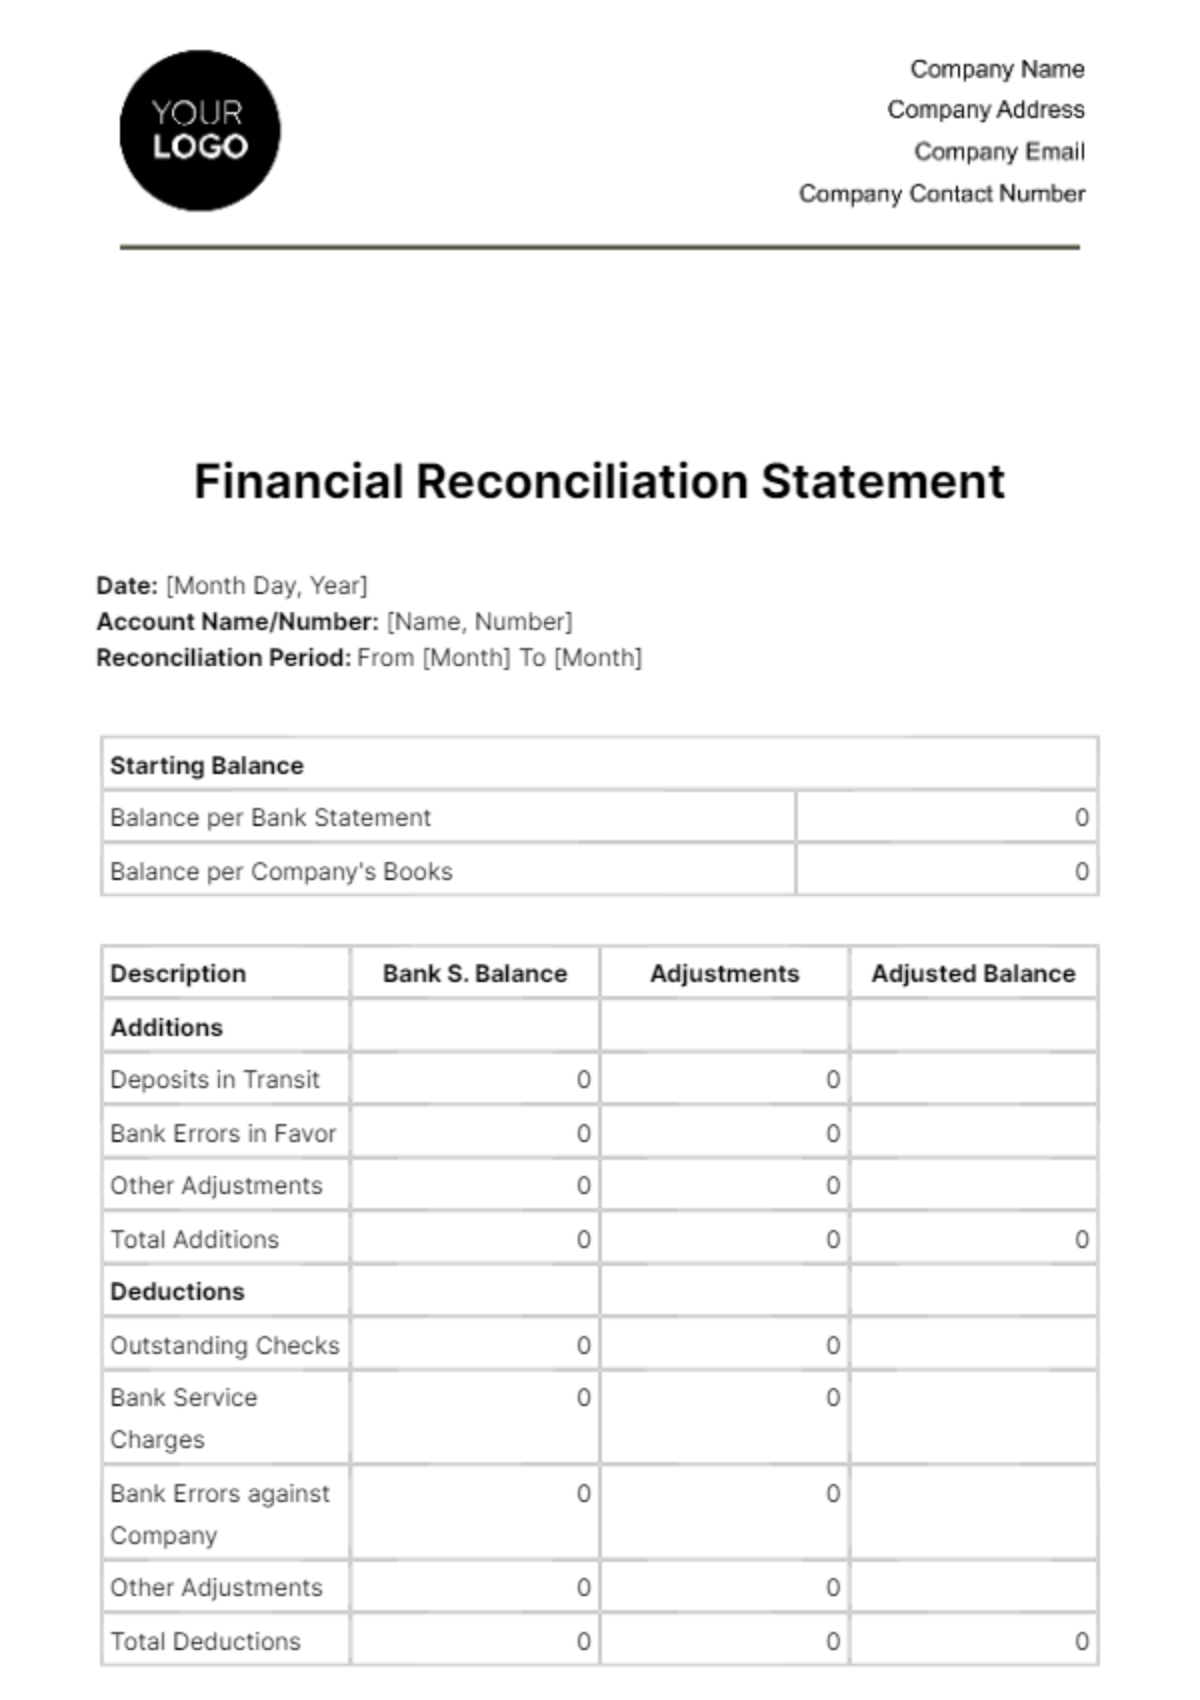 Financial Reconciliation Statement Template